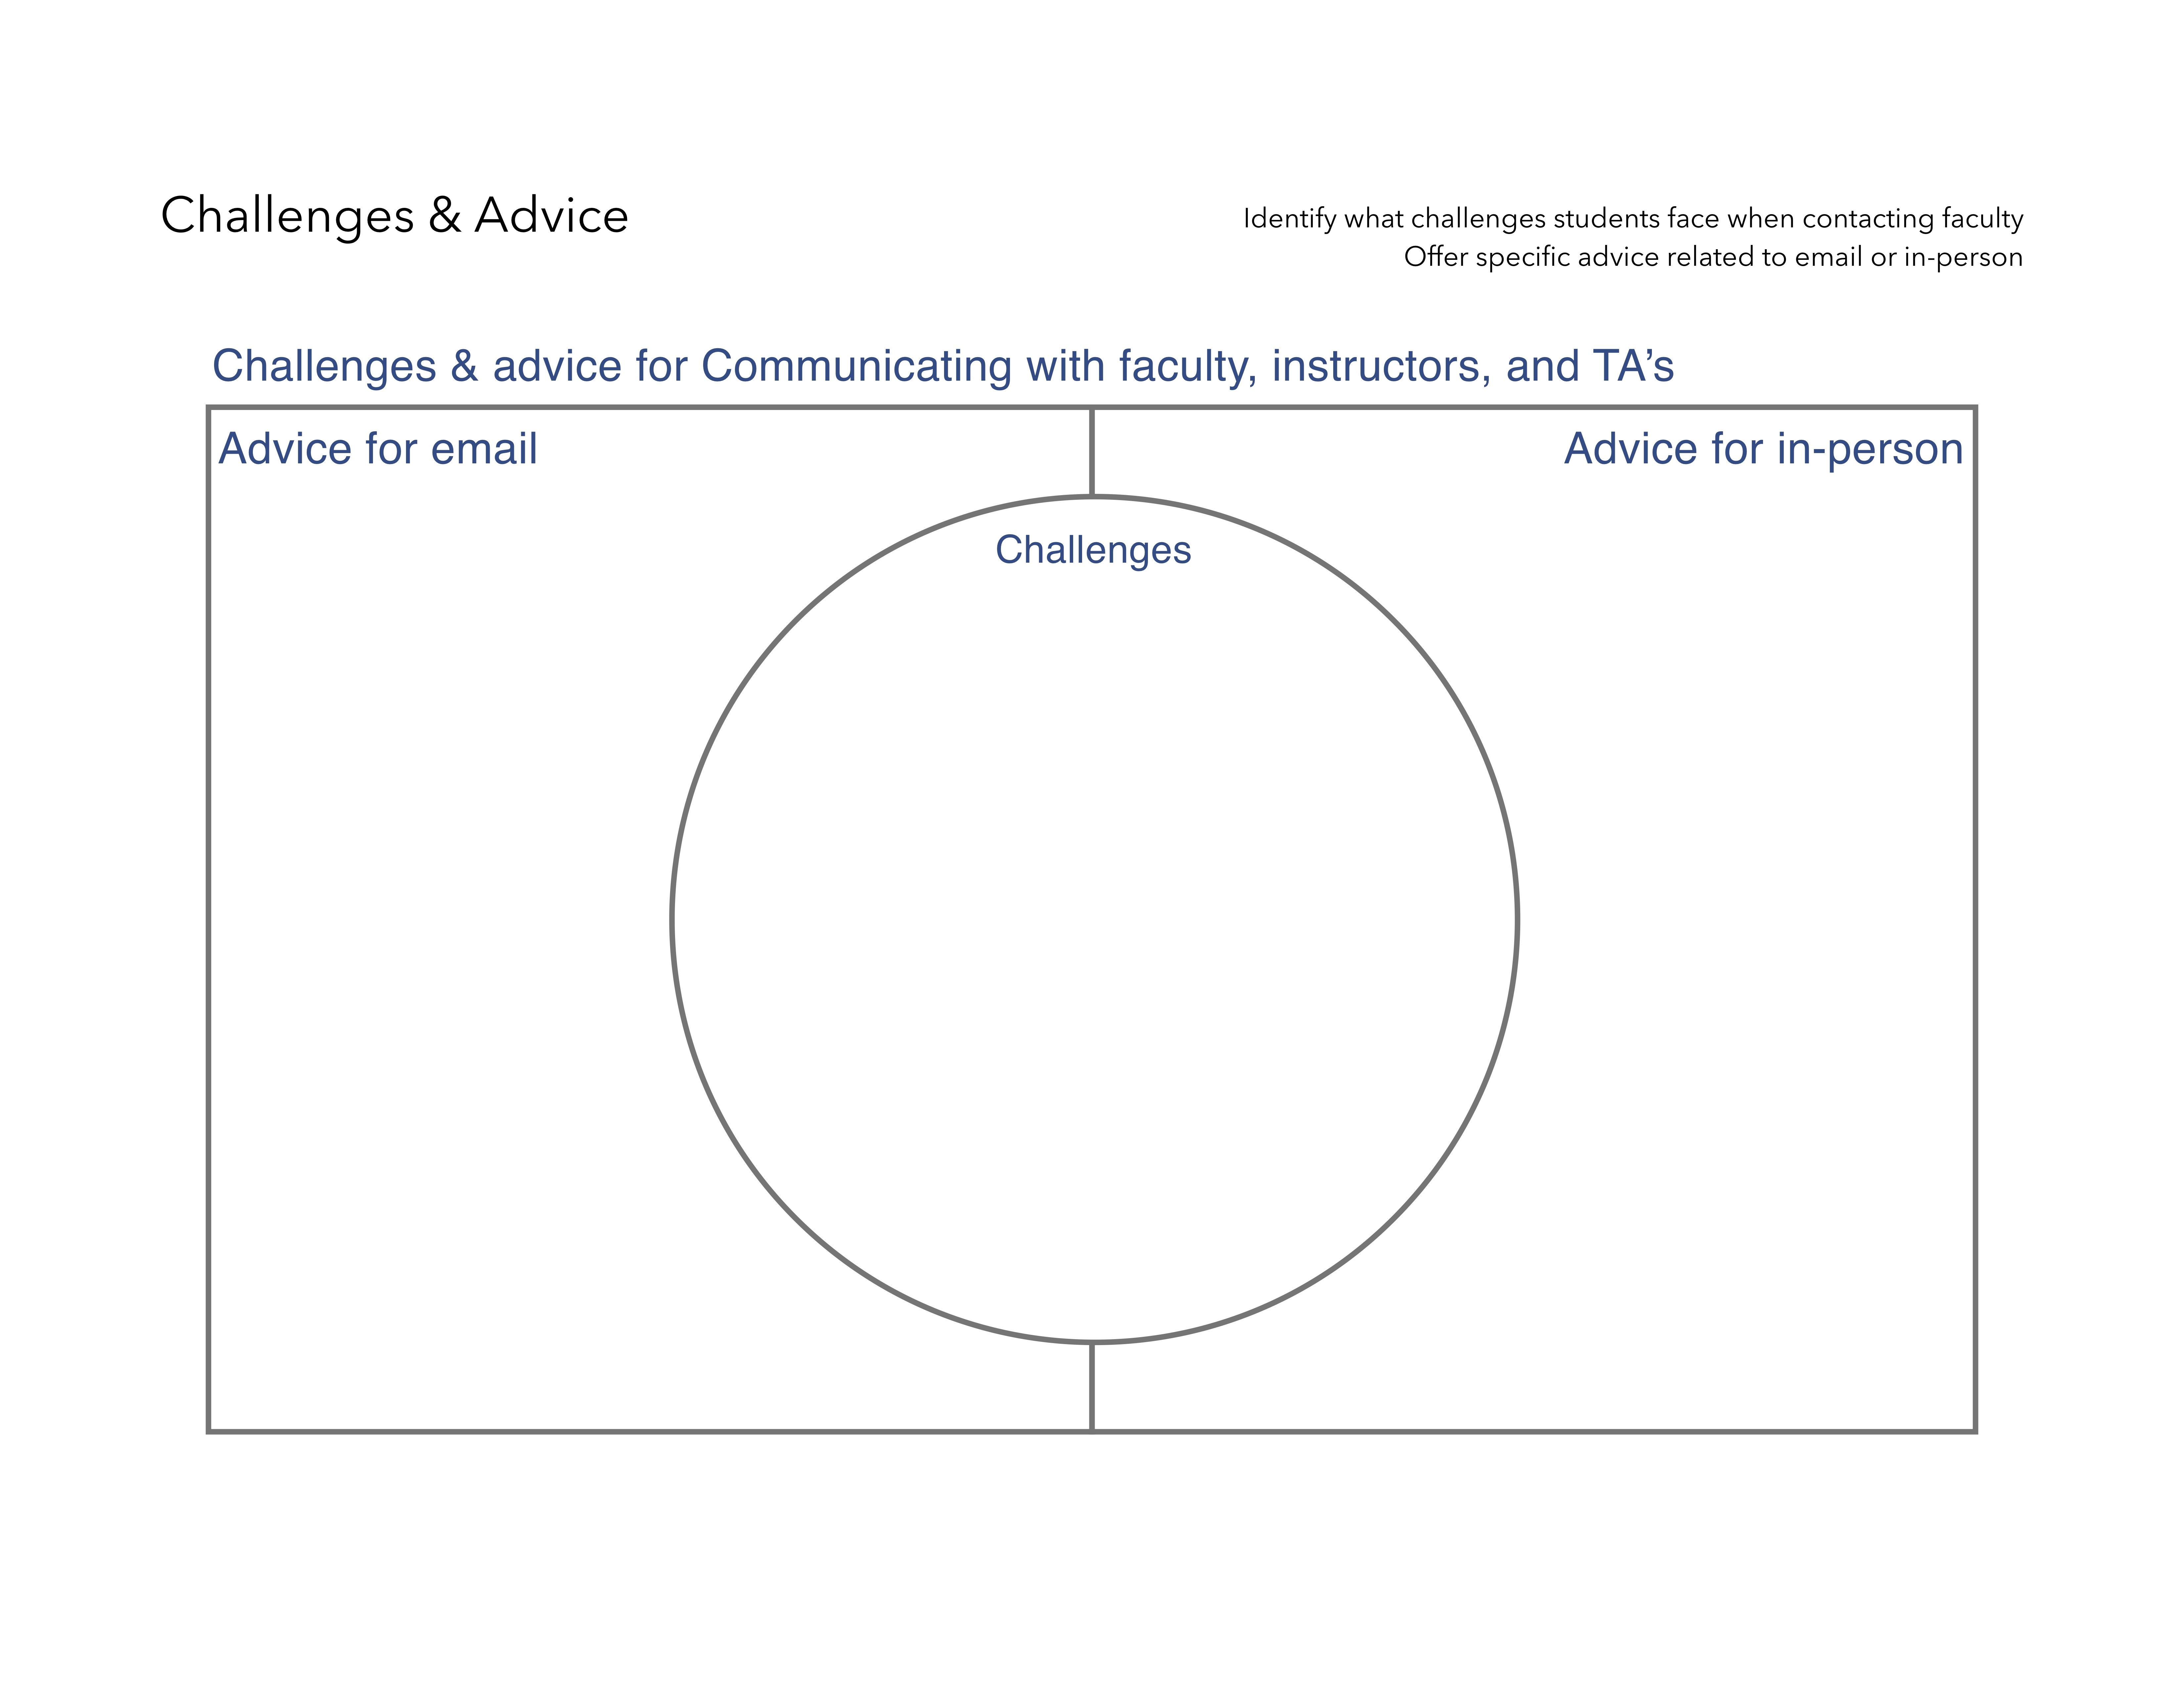 A circle in the middle of the page labeled Challenges. Two boxes on either side - the left box labeled e-mail and the right box labeled in-person.